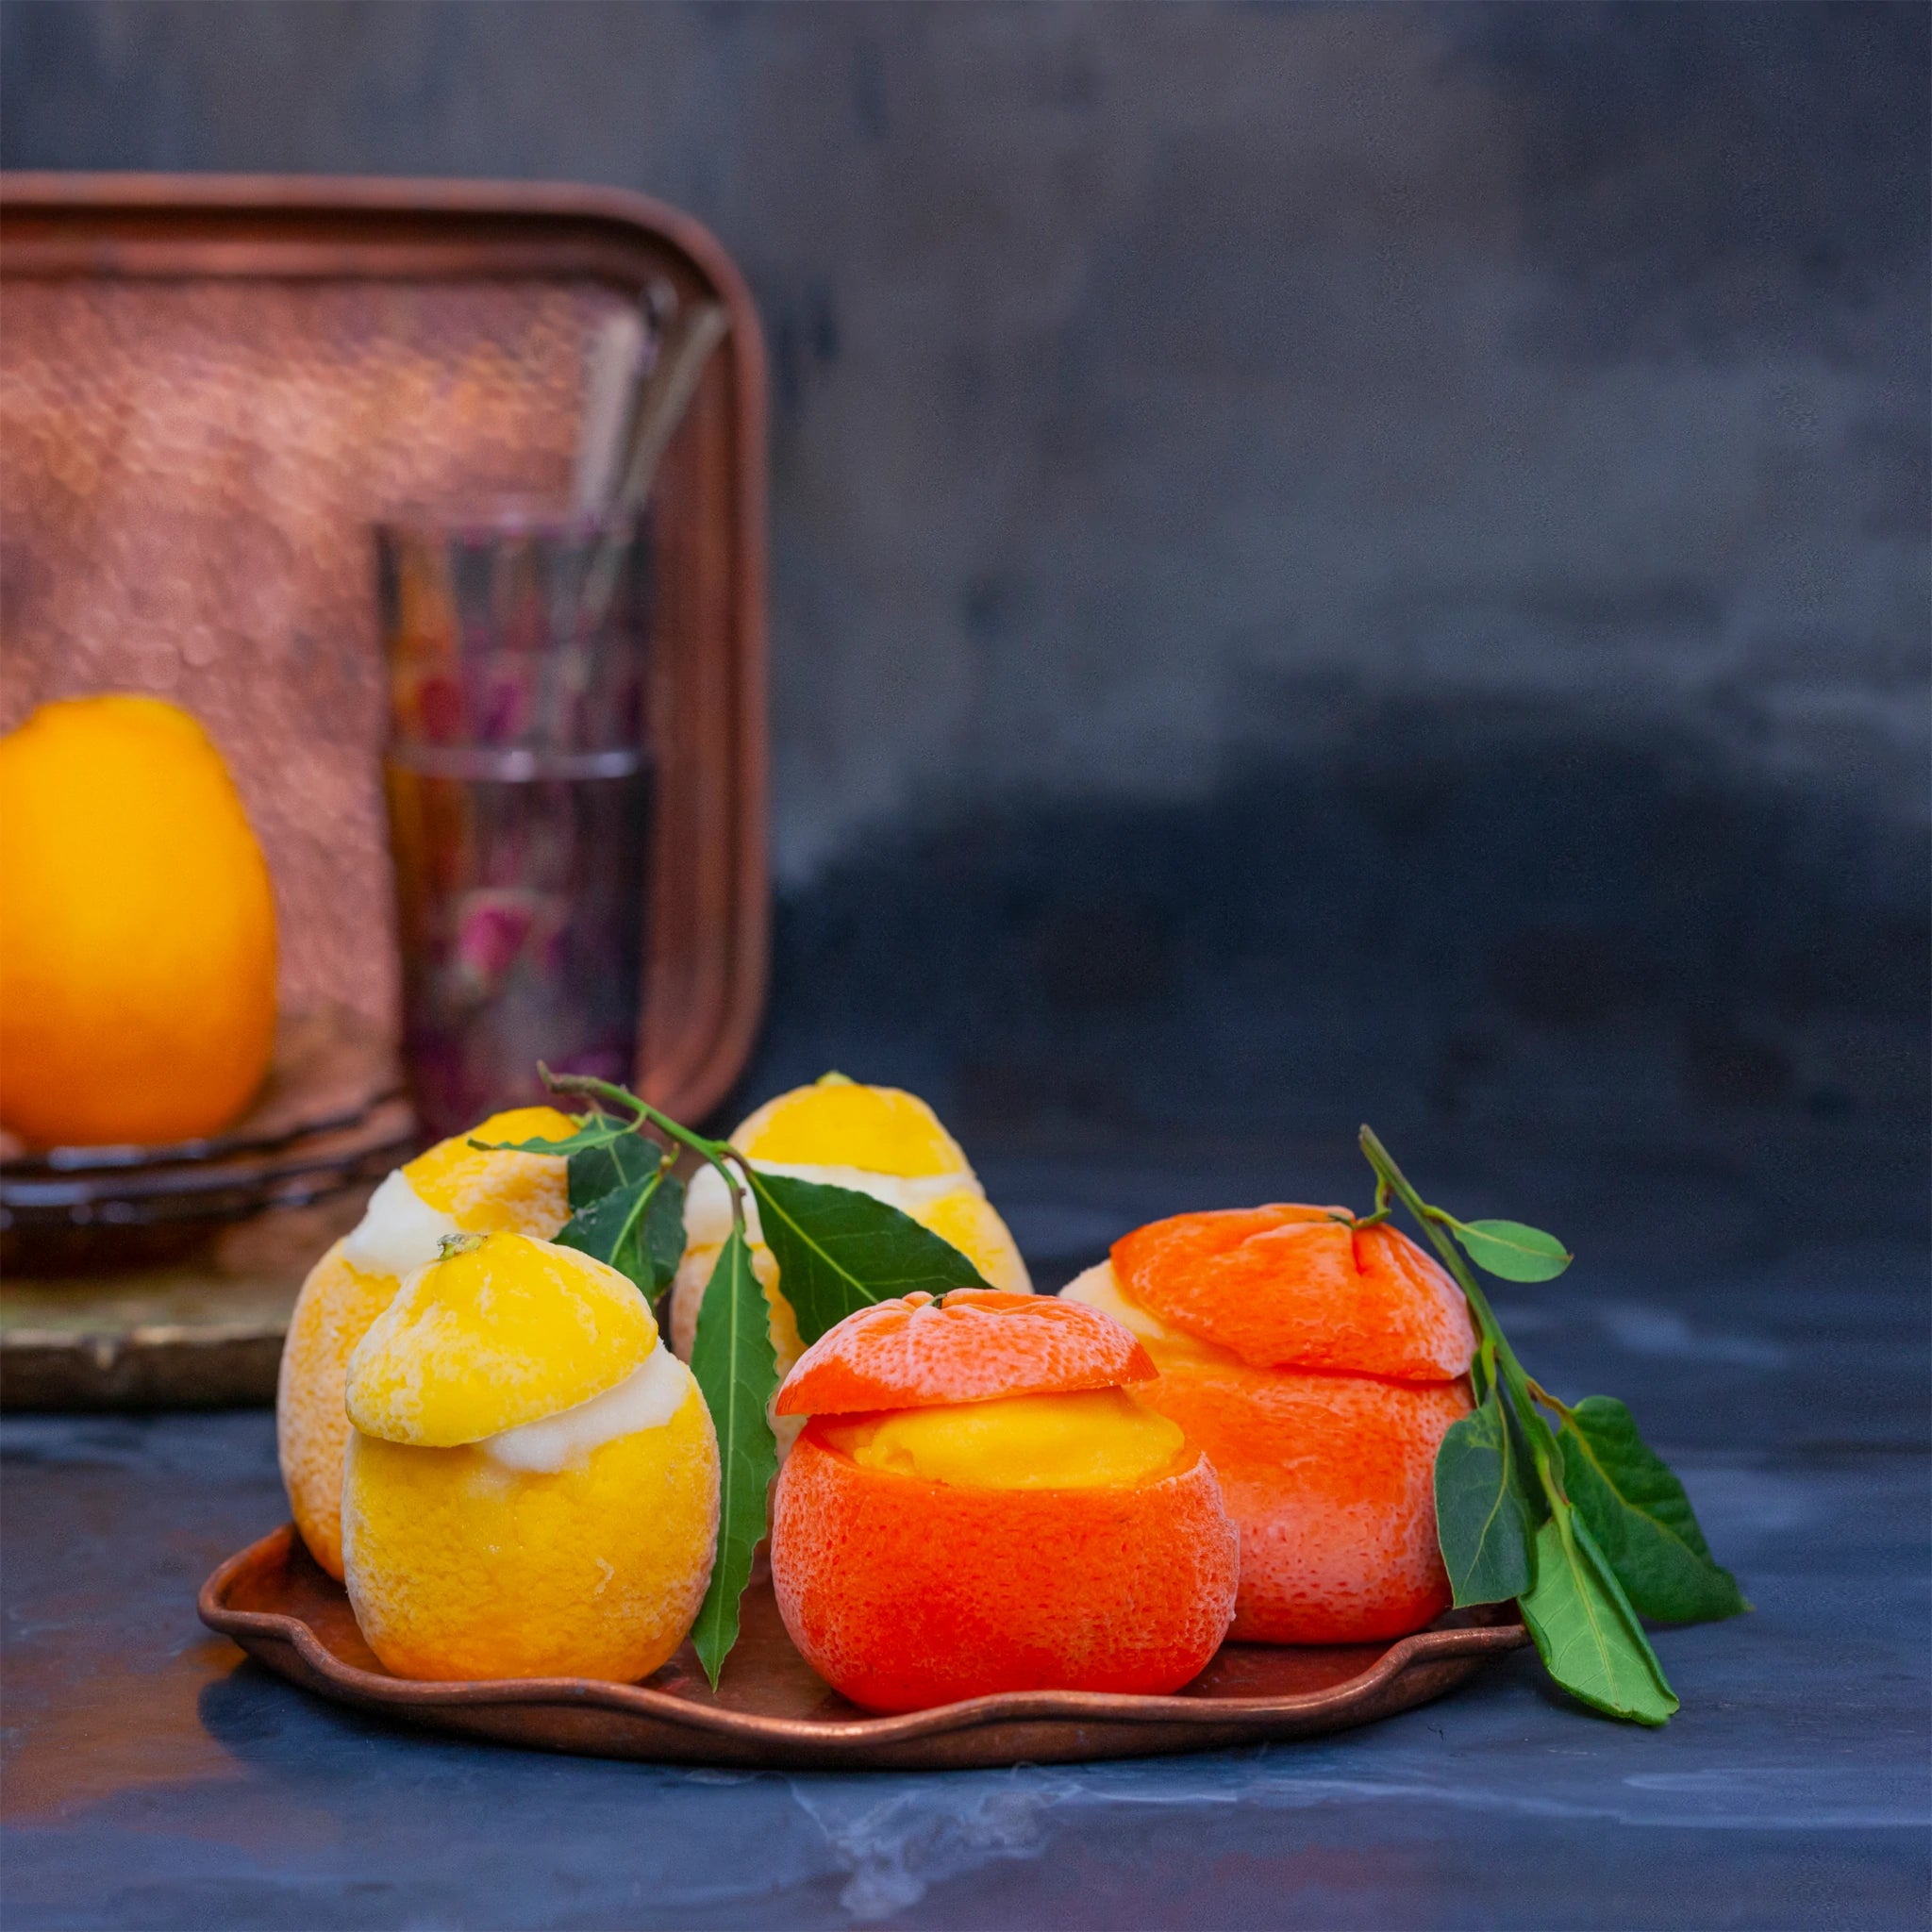 Sorbet filled lemons and clementines on a tray